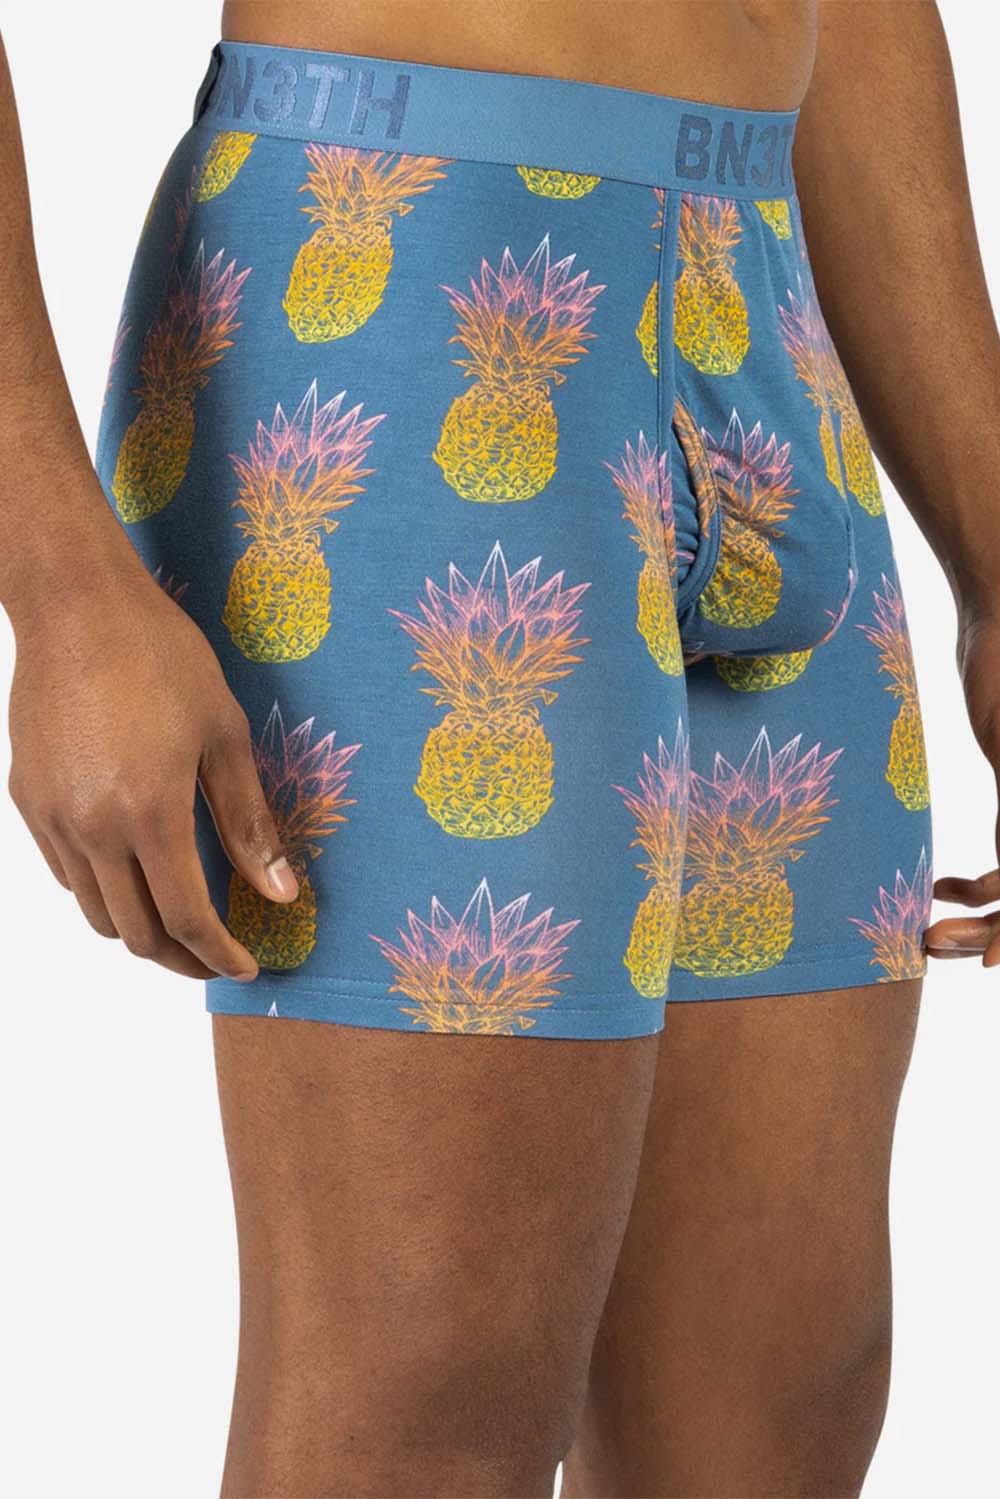 BN3TH - Classic Boxer Brief With Fly - Pineapple Fade Fog - Front